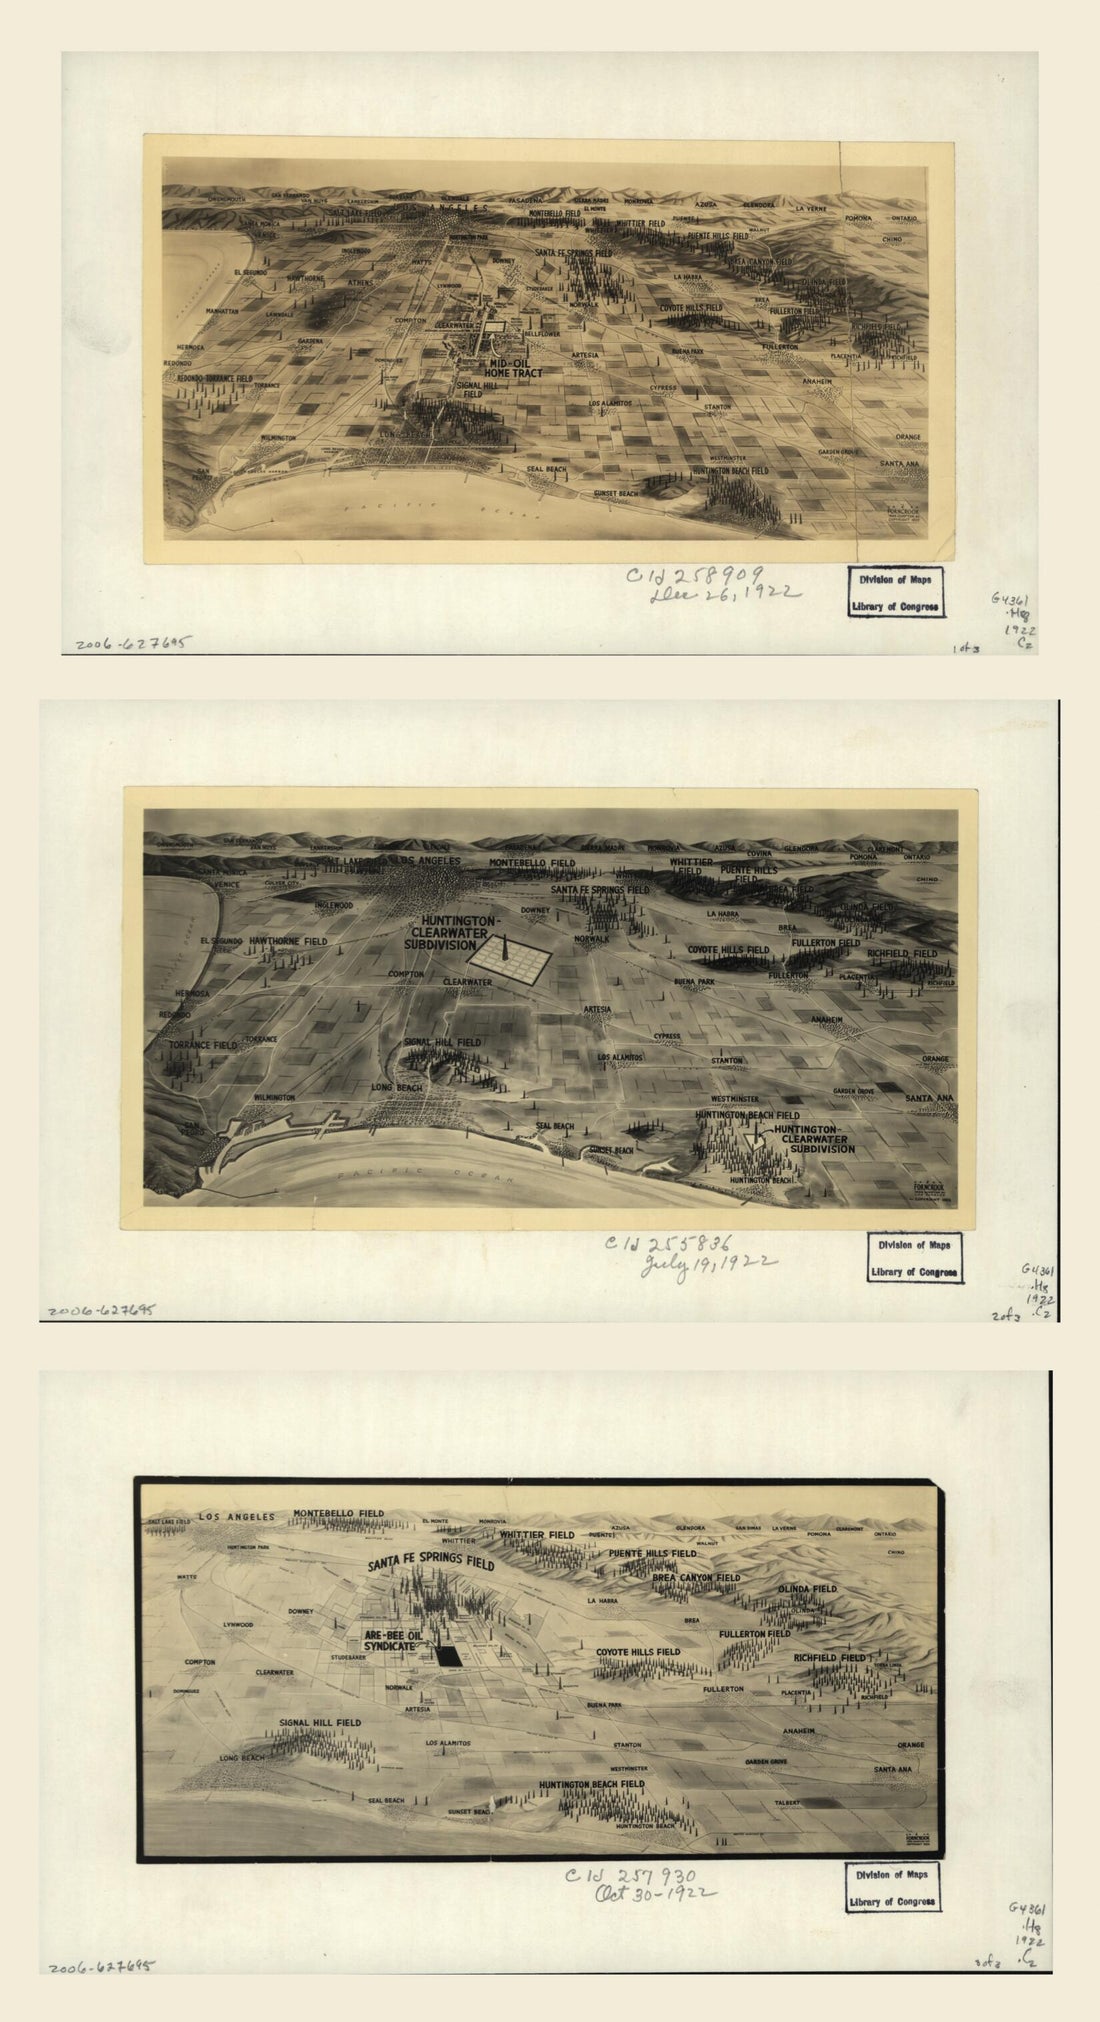 This old map of Views of Oil Fields Around Los Angeles from 1922 was created by  C.S. &amp; E.M Forncrook in 1922